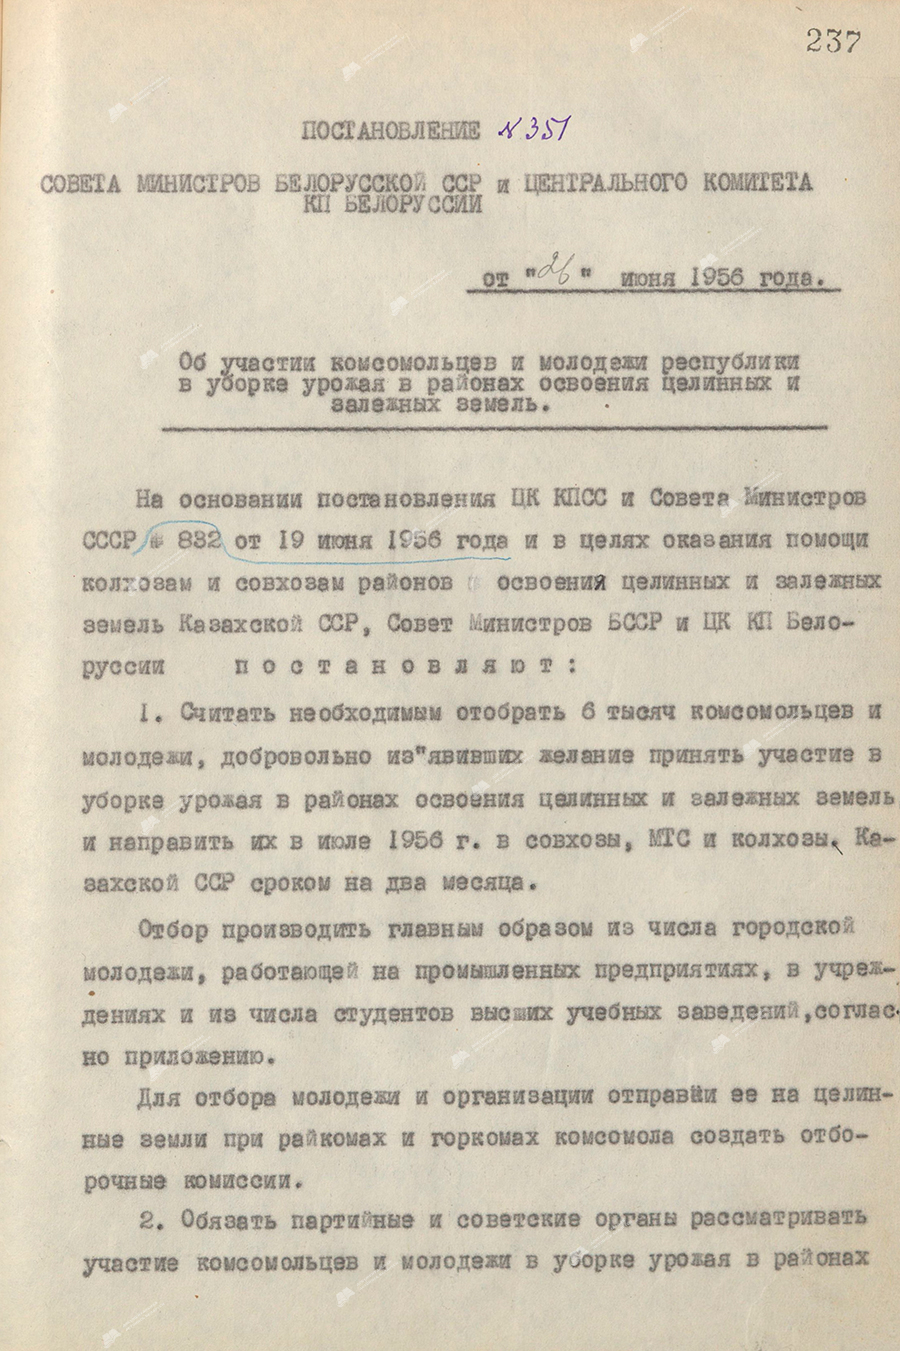 Resolution No. 351 of the Council of Ministers of the BSSR and the Central Committee of the Communist Party of Belarus «On the participation of Komsomol members and youth of the republic and harvesting in areas of development of virgin and fallow lands»-с. 0